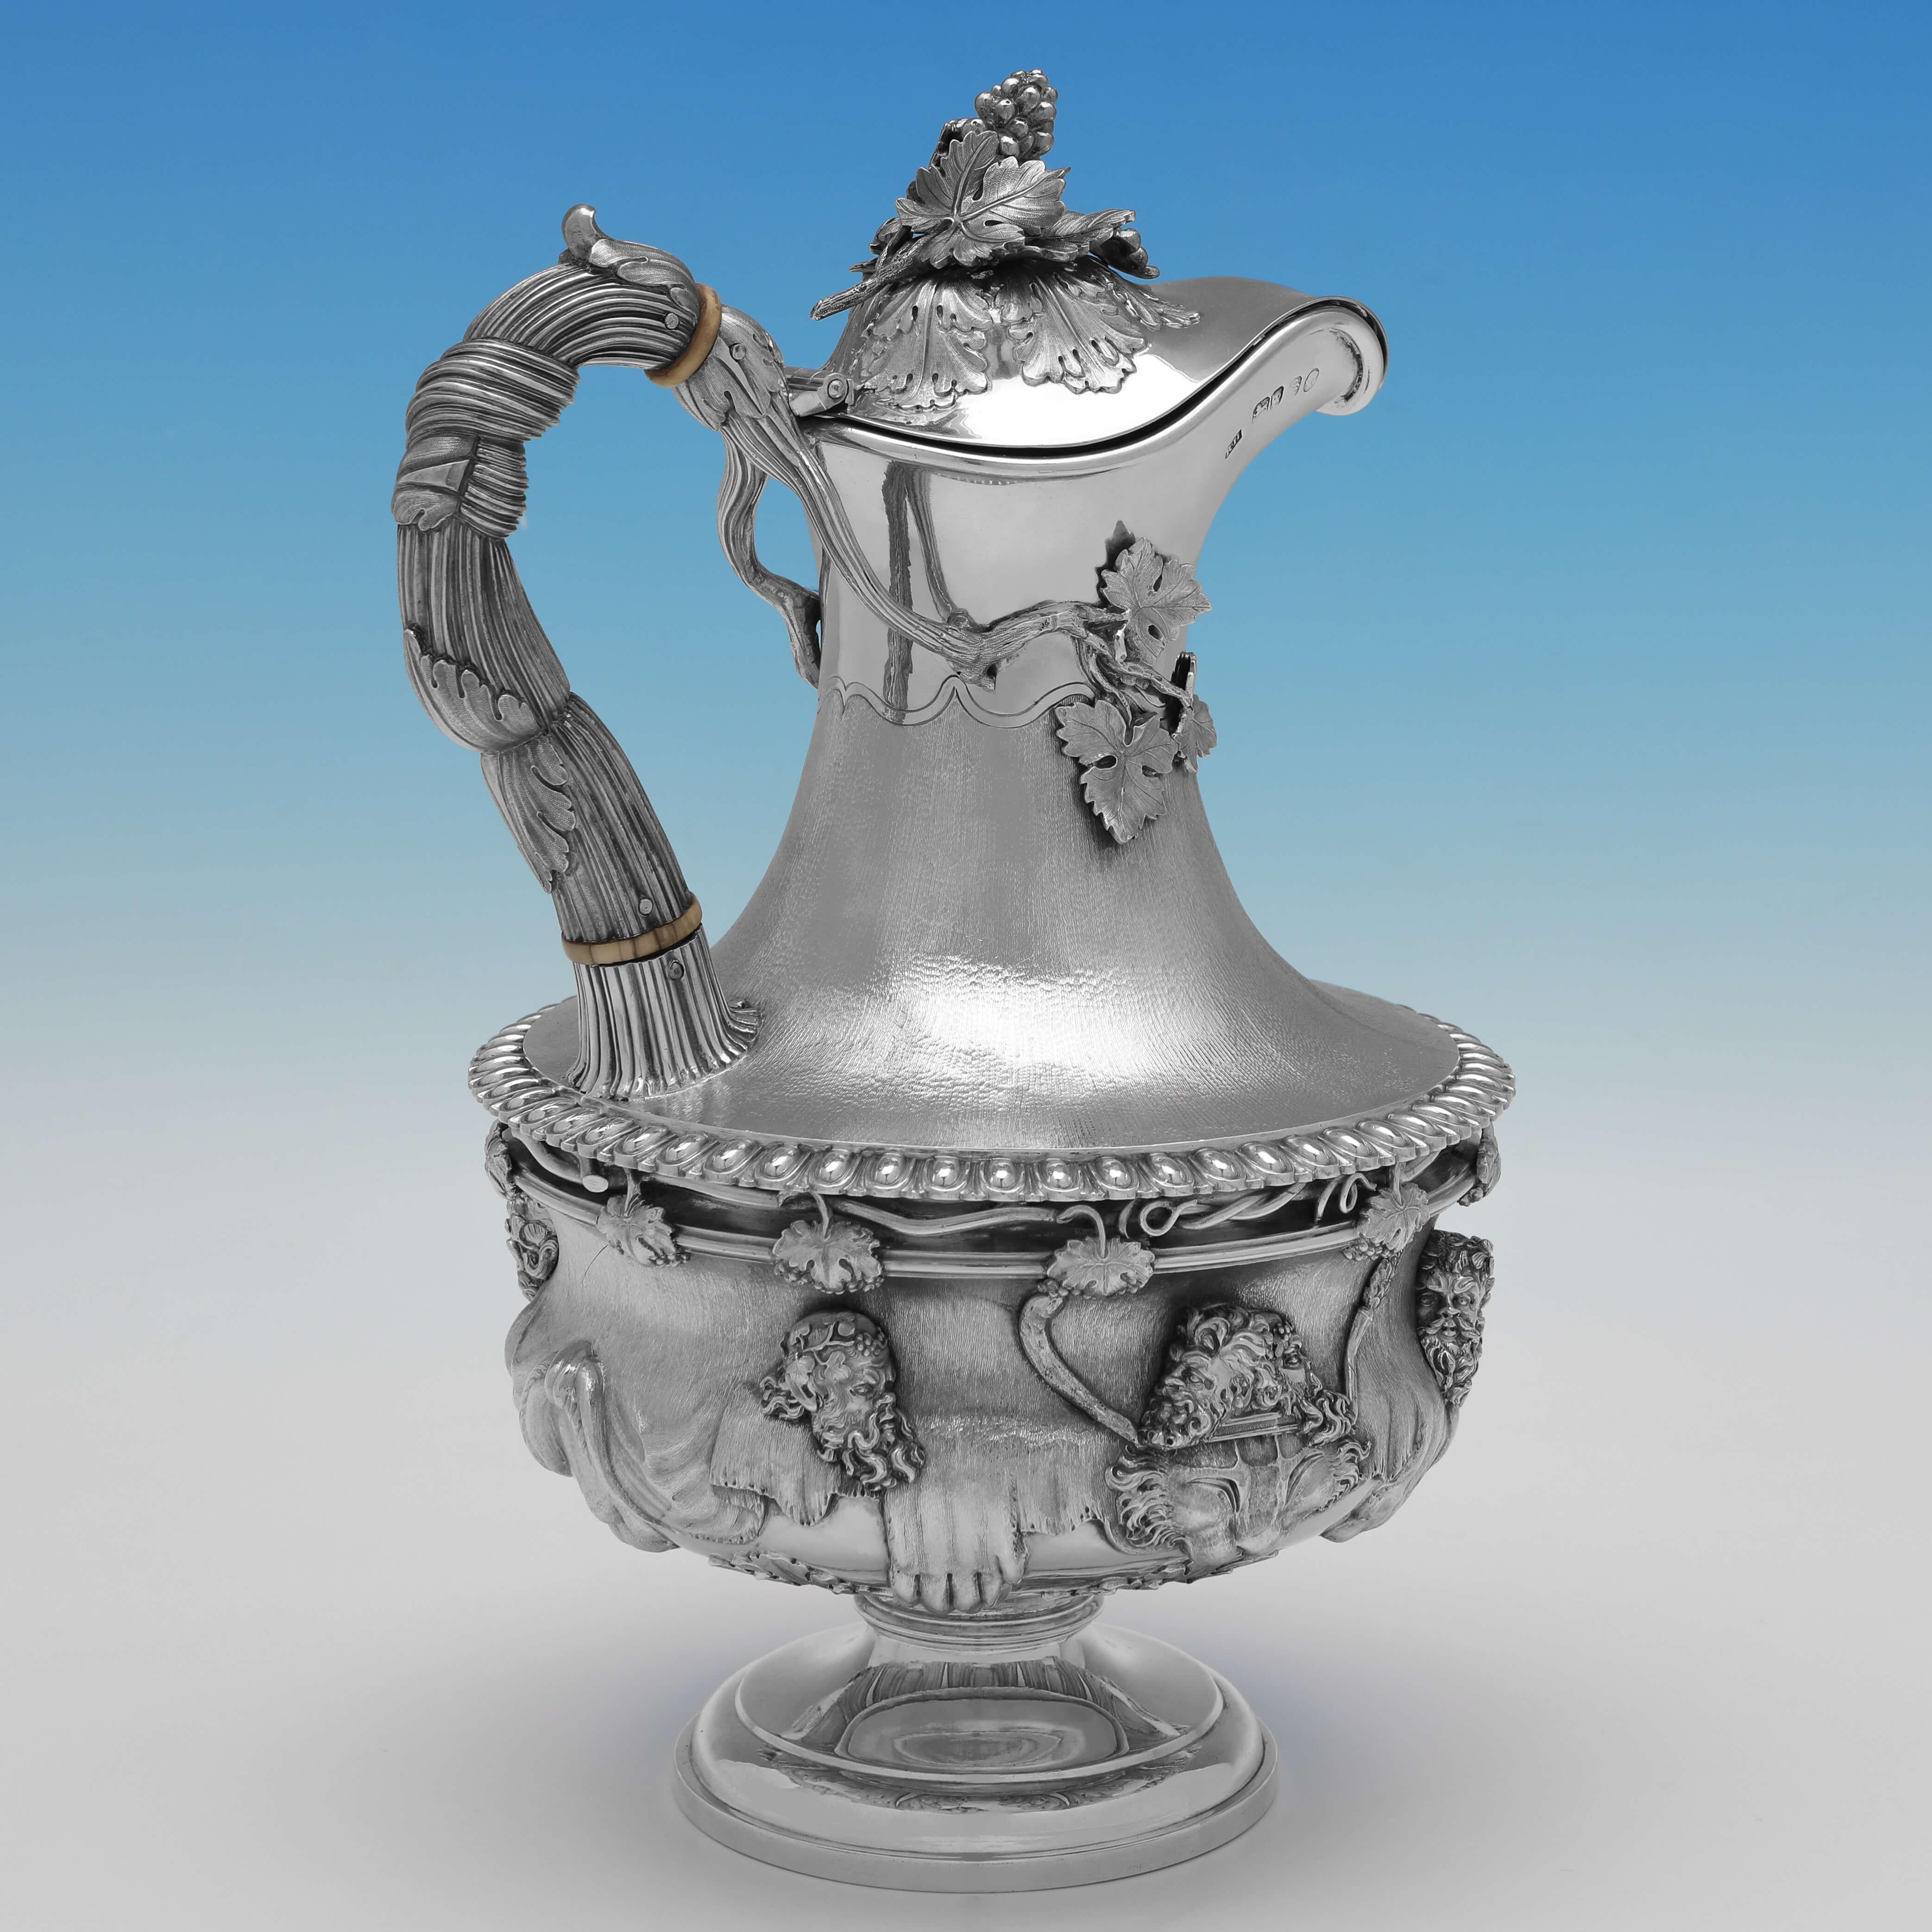 Hallmarked in London in 1853 by Robert Hennell III, this stunning, Victorian, Antique Sterling Silver Jug, is a very rare example modelled in the style of the famous Warwick Vase. 

The jug measures 11.25